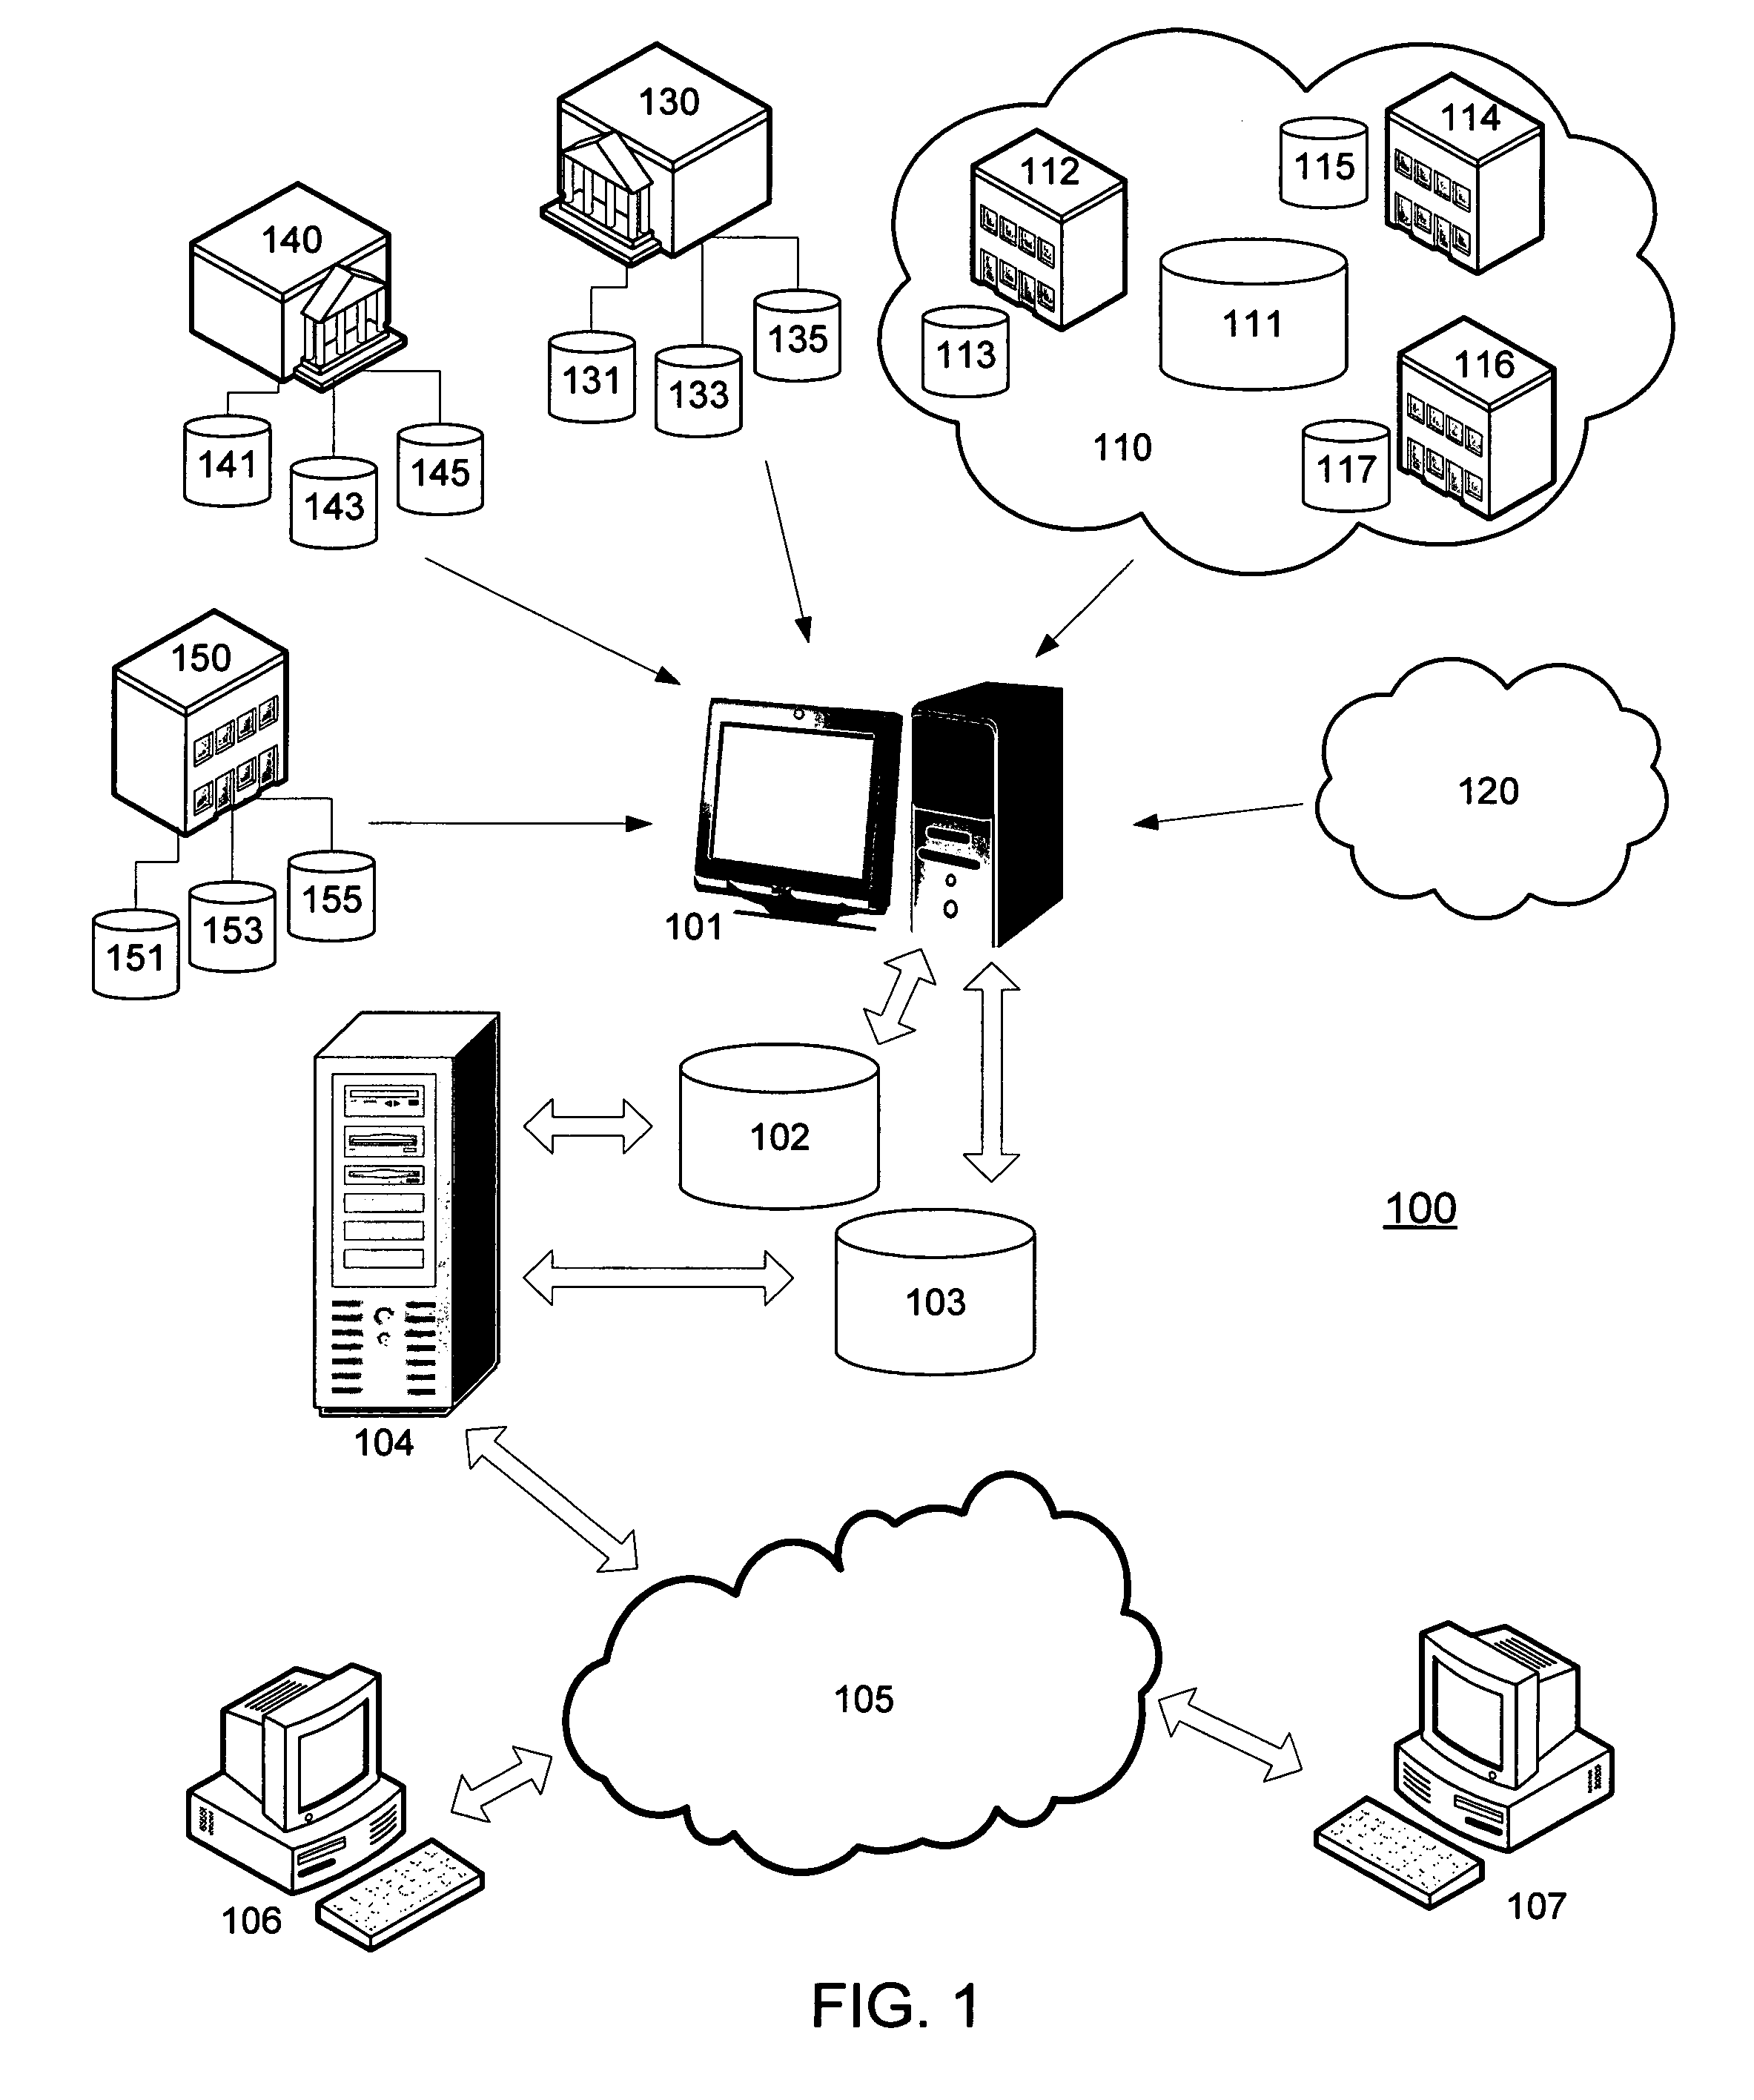 System and method for peer-profiling individual performance